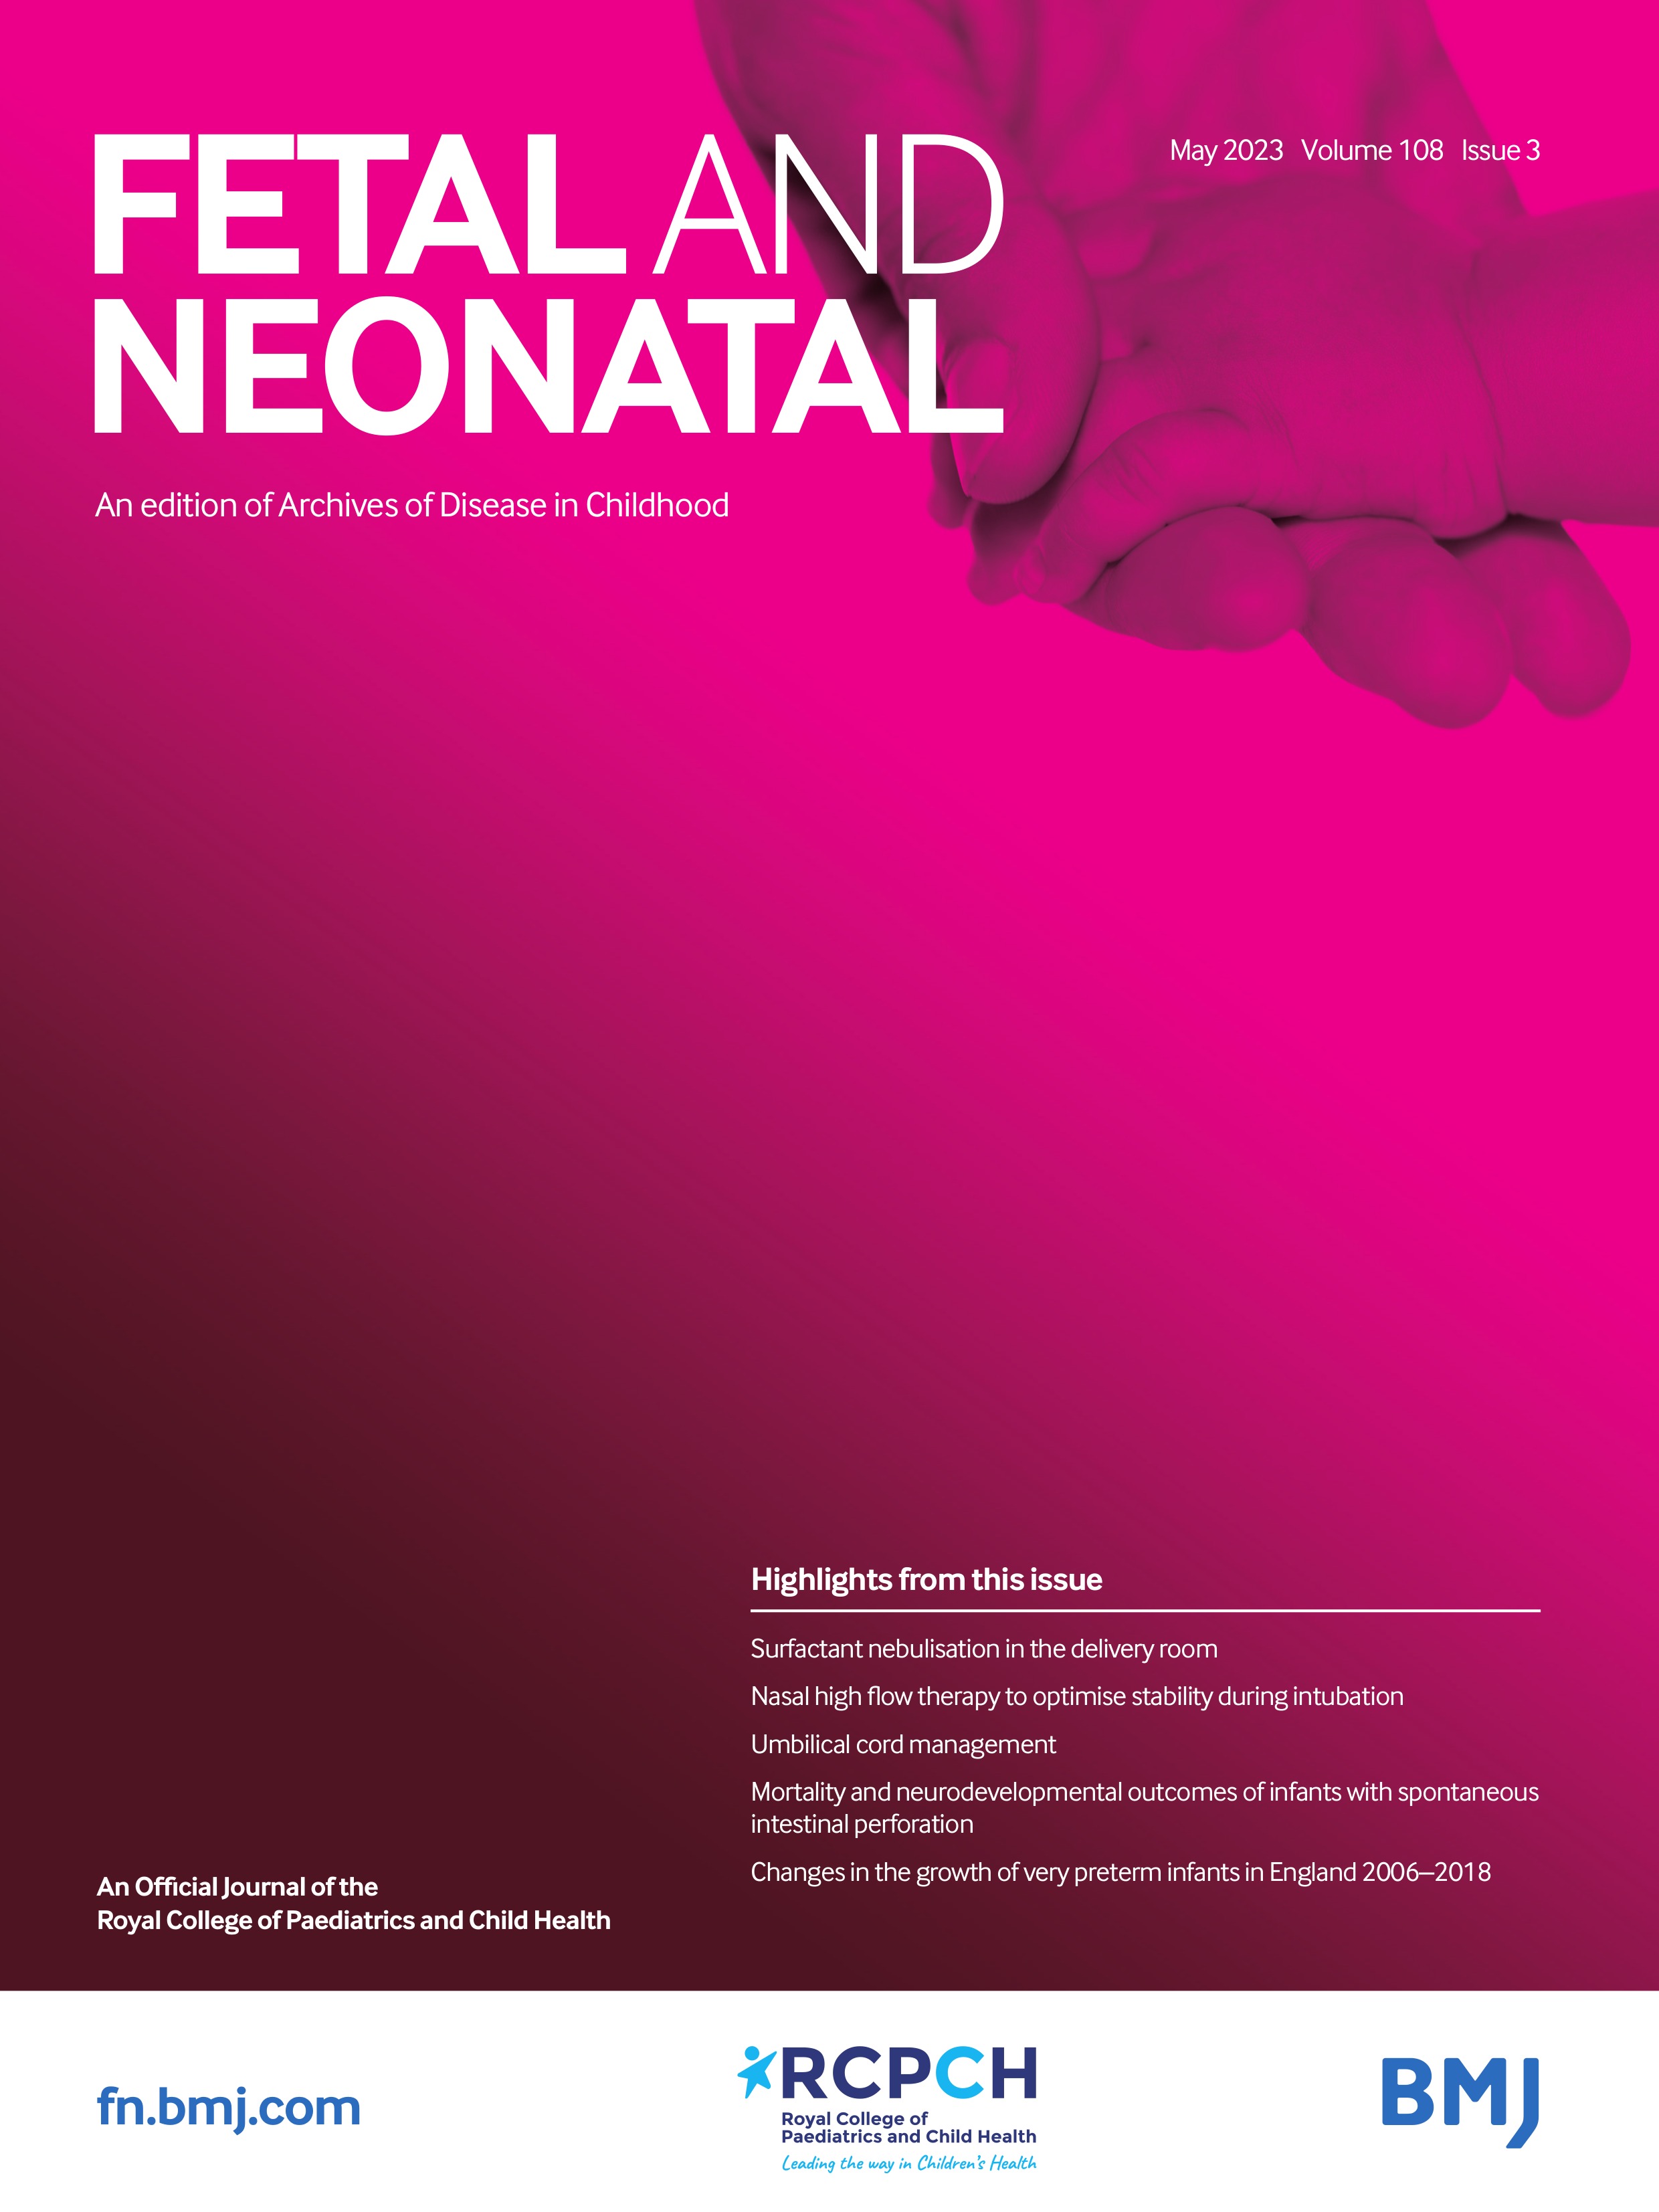 Nasal high-flow therapy to Optimise Stability during Intubation: the NOSI pilot trial